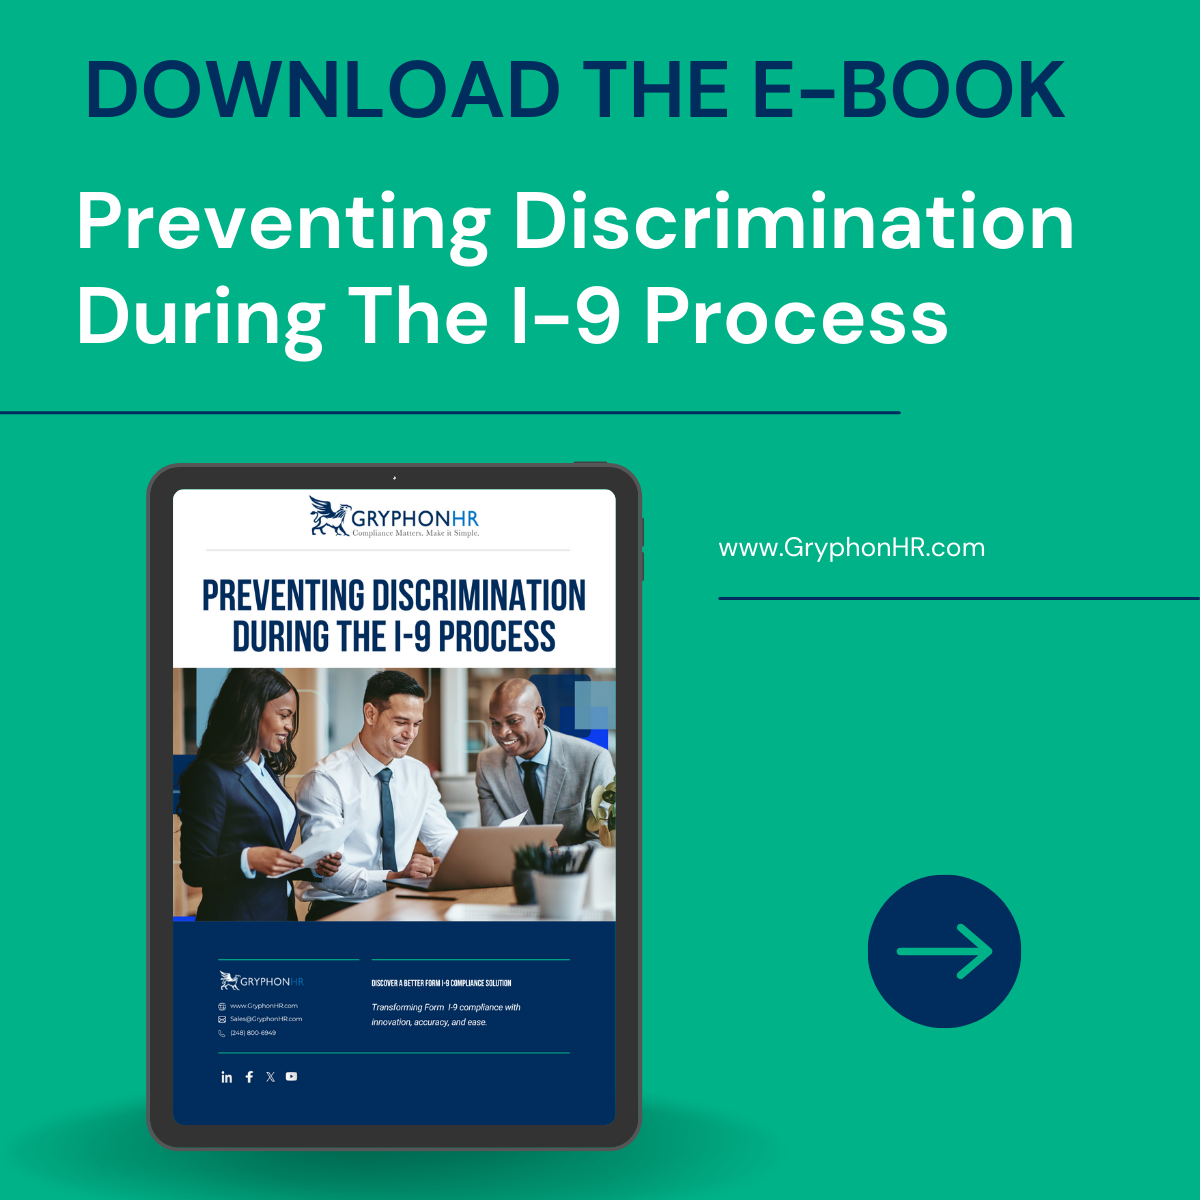 an e-book about preventing discrimination during the 1-9 process